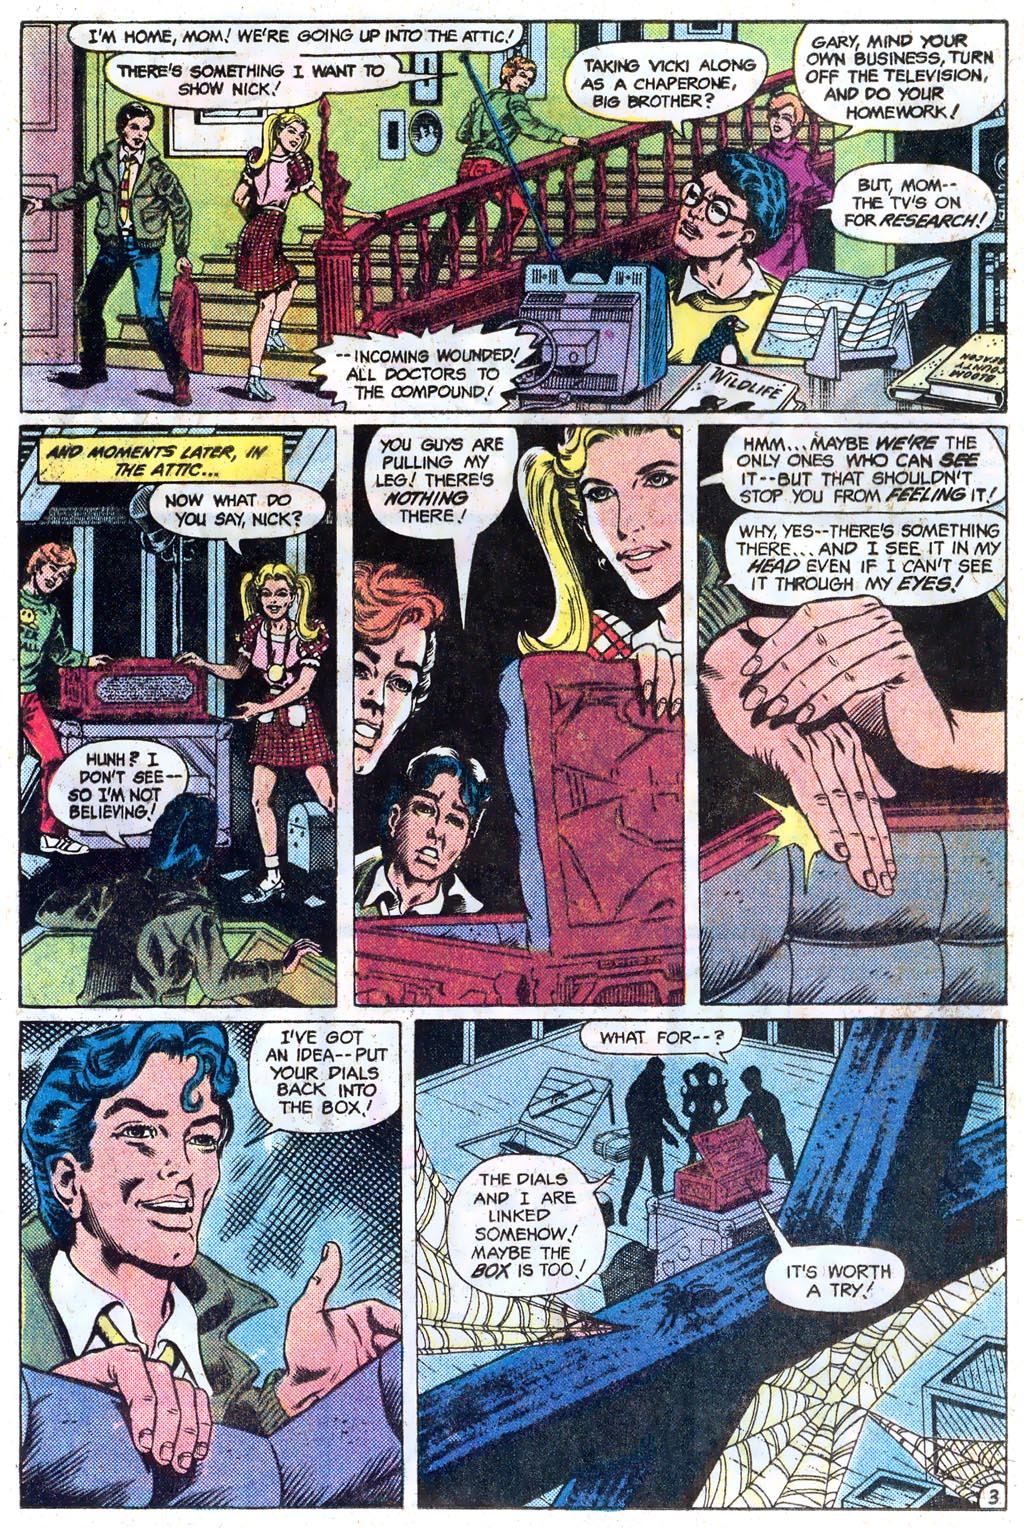 The New Adventures of Superboy 45 Page 24